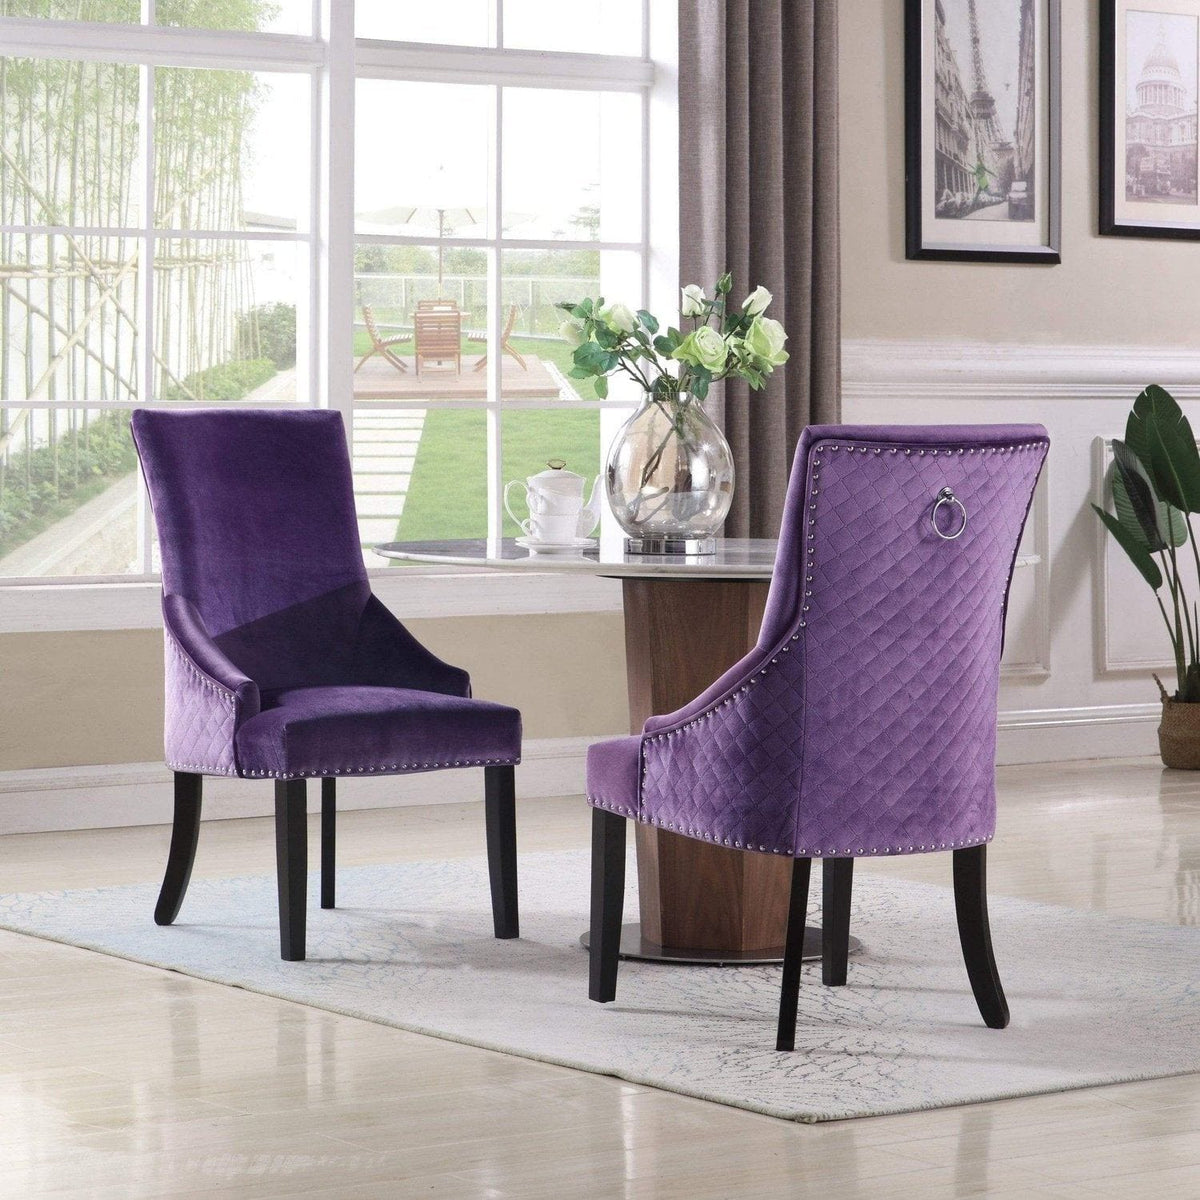 Iconic Home Machla Tufted Velvet Dining Chair Set of 2 Lavender